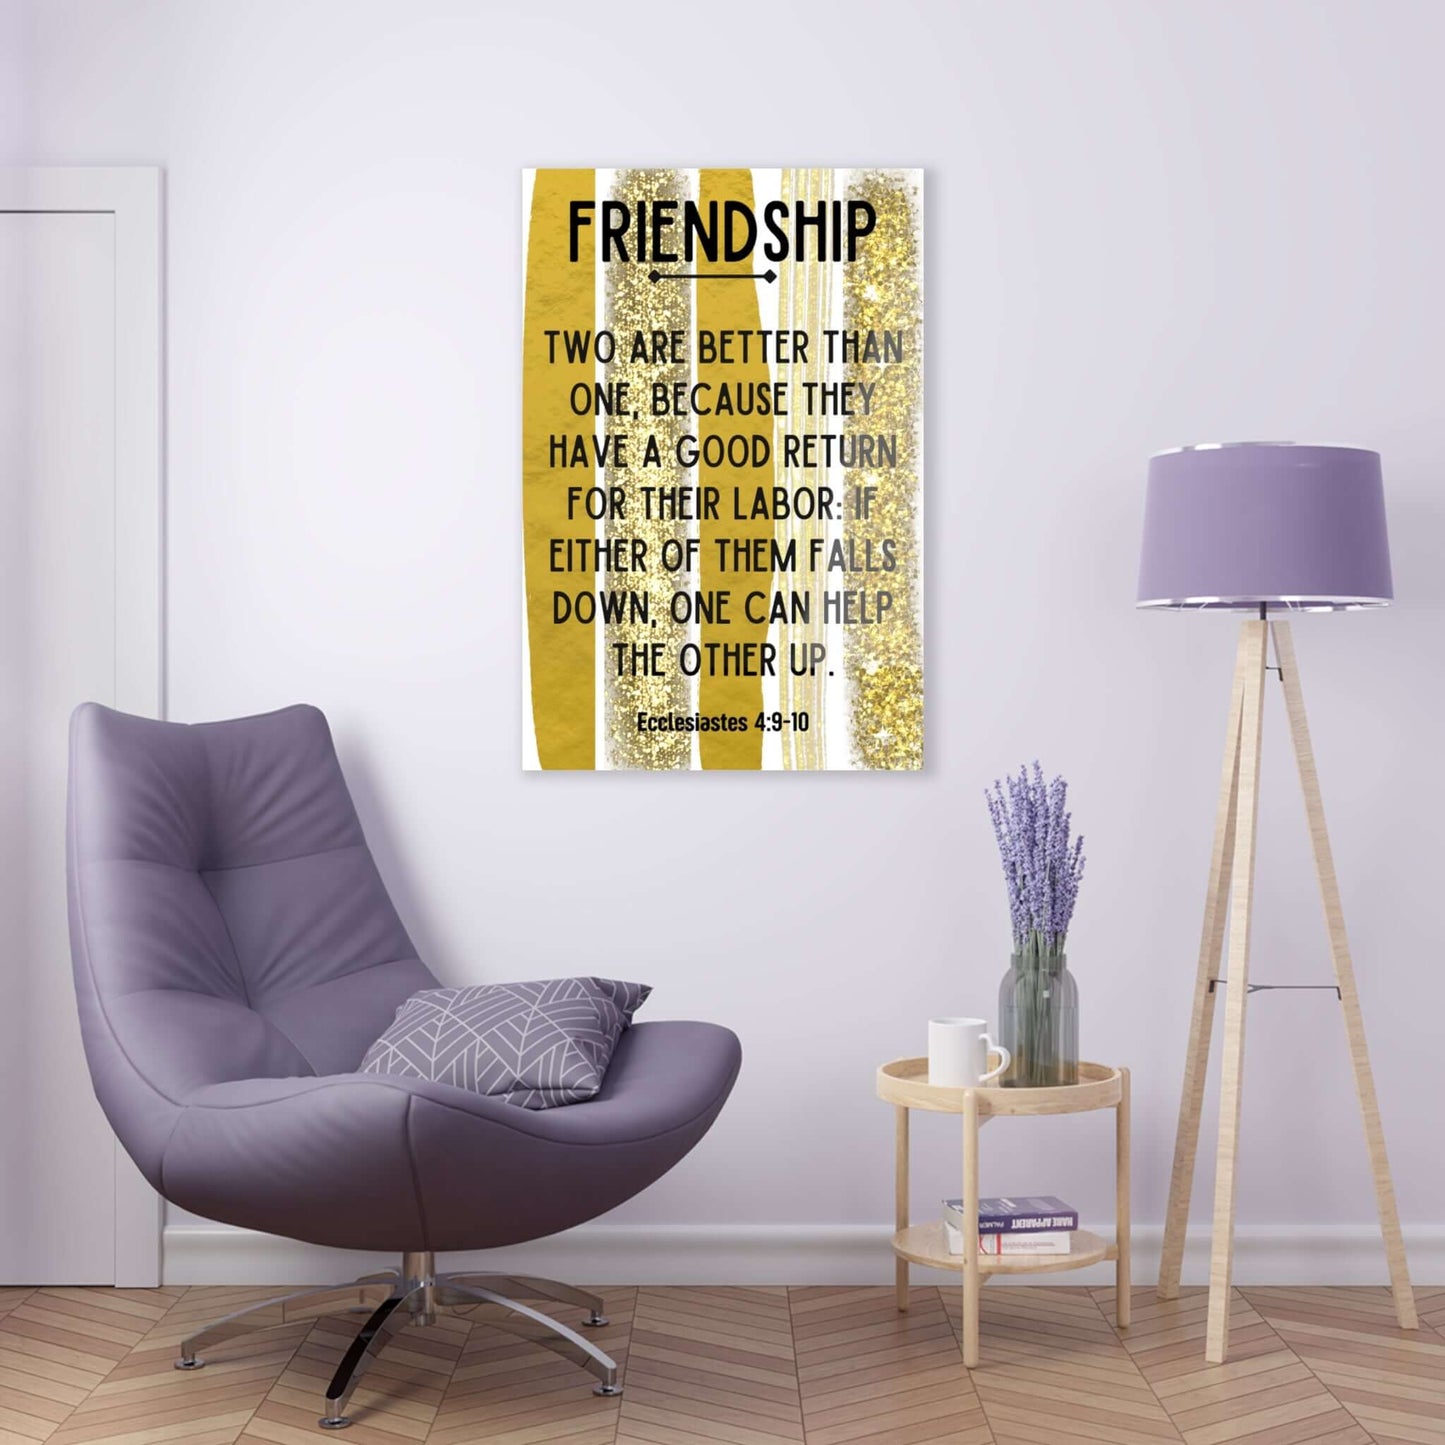 Entry Wall Decor: Acrylic Print with Inspiring Scripture | Art & Wall Decor,Assembled in the USA,Assembled in USA,Decor,Home & Living,Home Decor,Indoor,Made in the USA,Made in USA,Poster